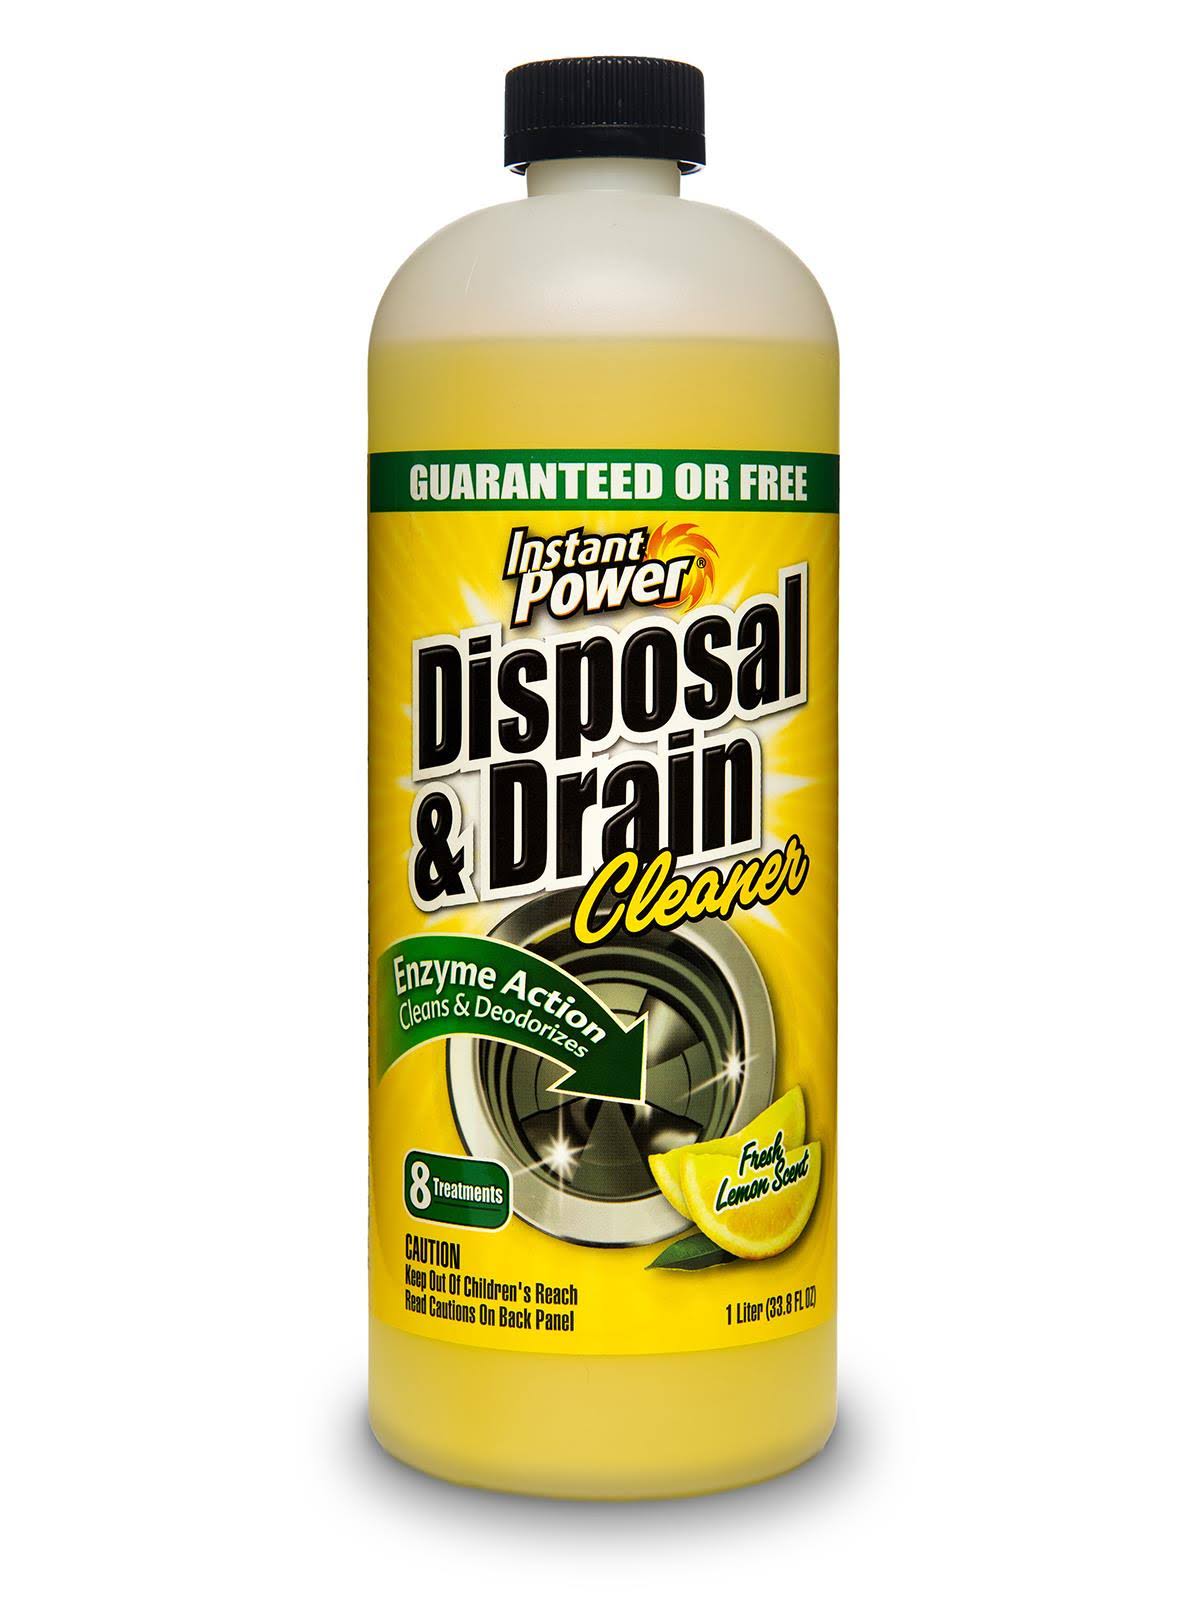 Instant Power Disposal and Drain Cleaner - Lemon Scent, 33.8oz